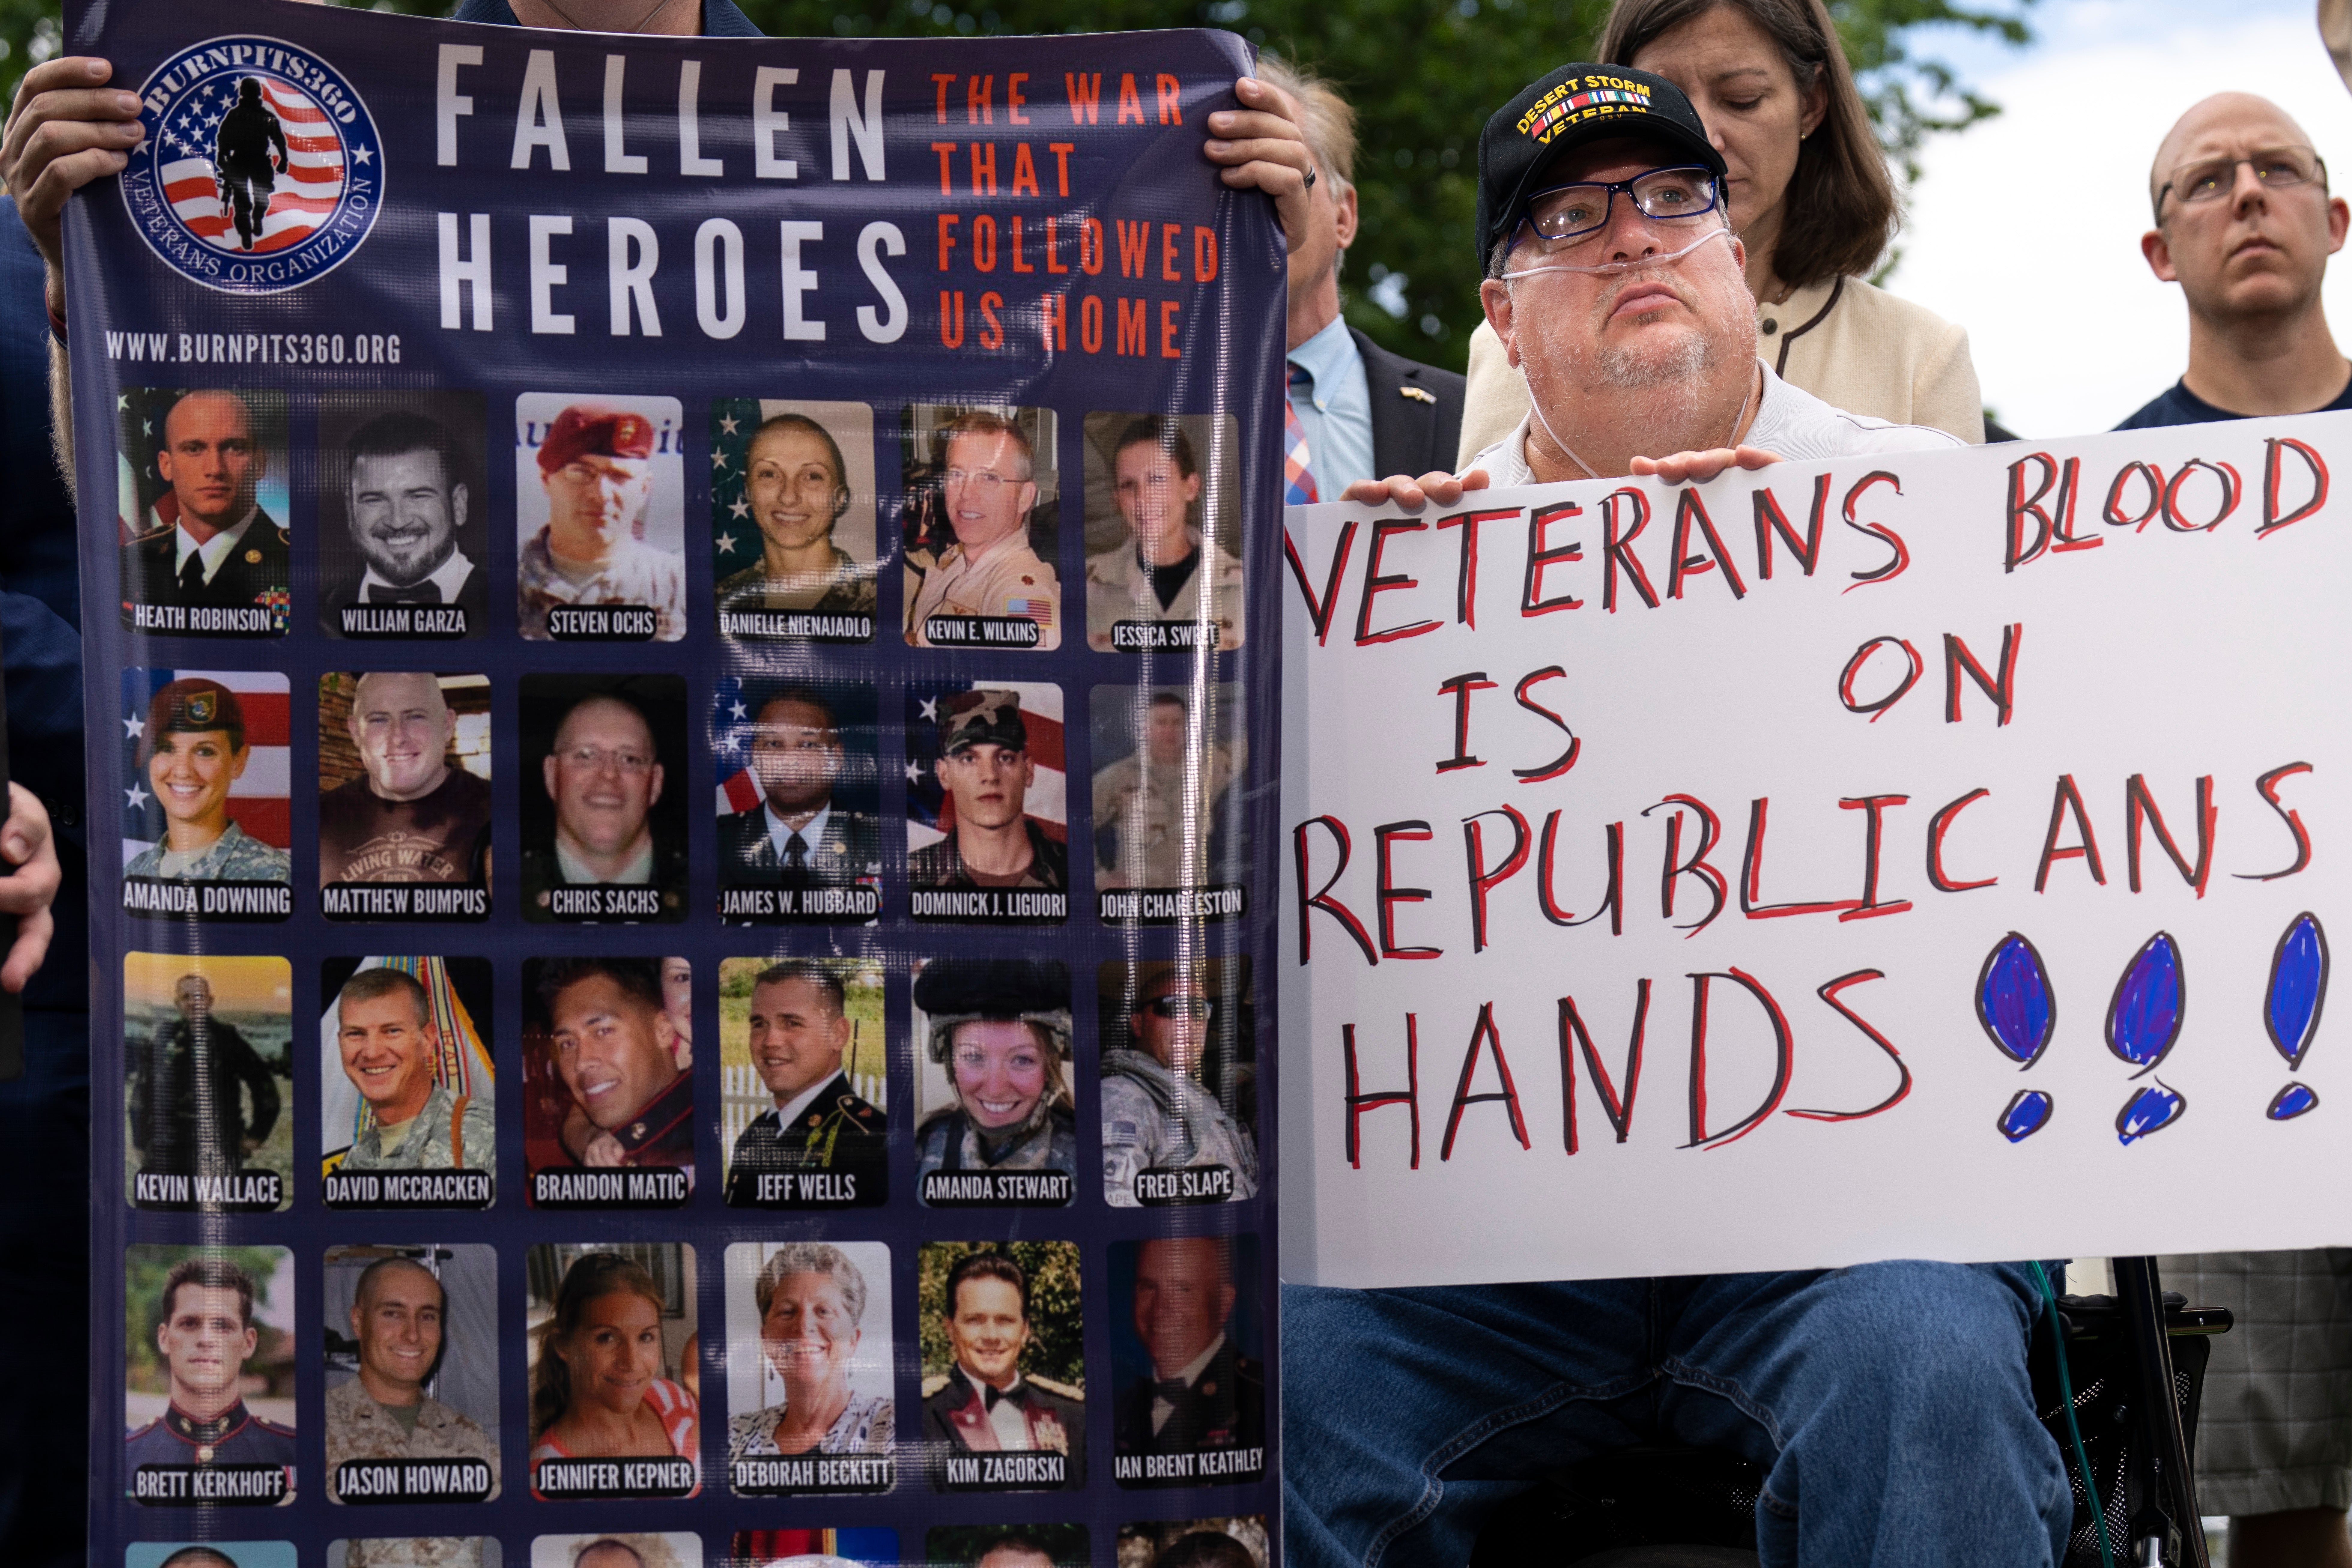 Veterans and advocates have condemned the GOP lawmakers now stopping veterans getting healthcare